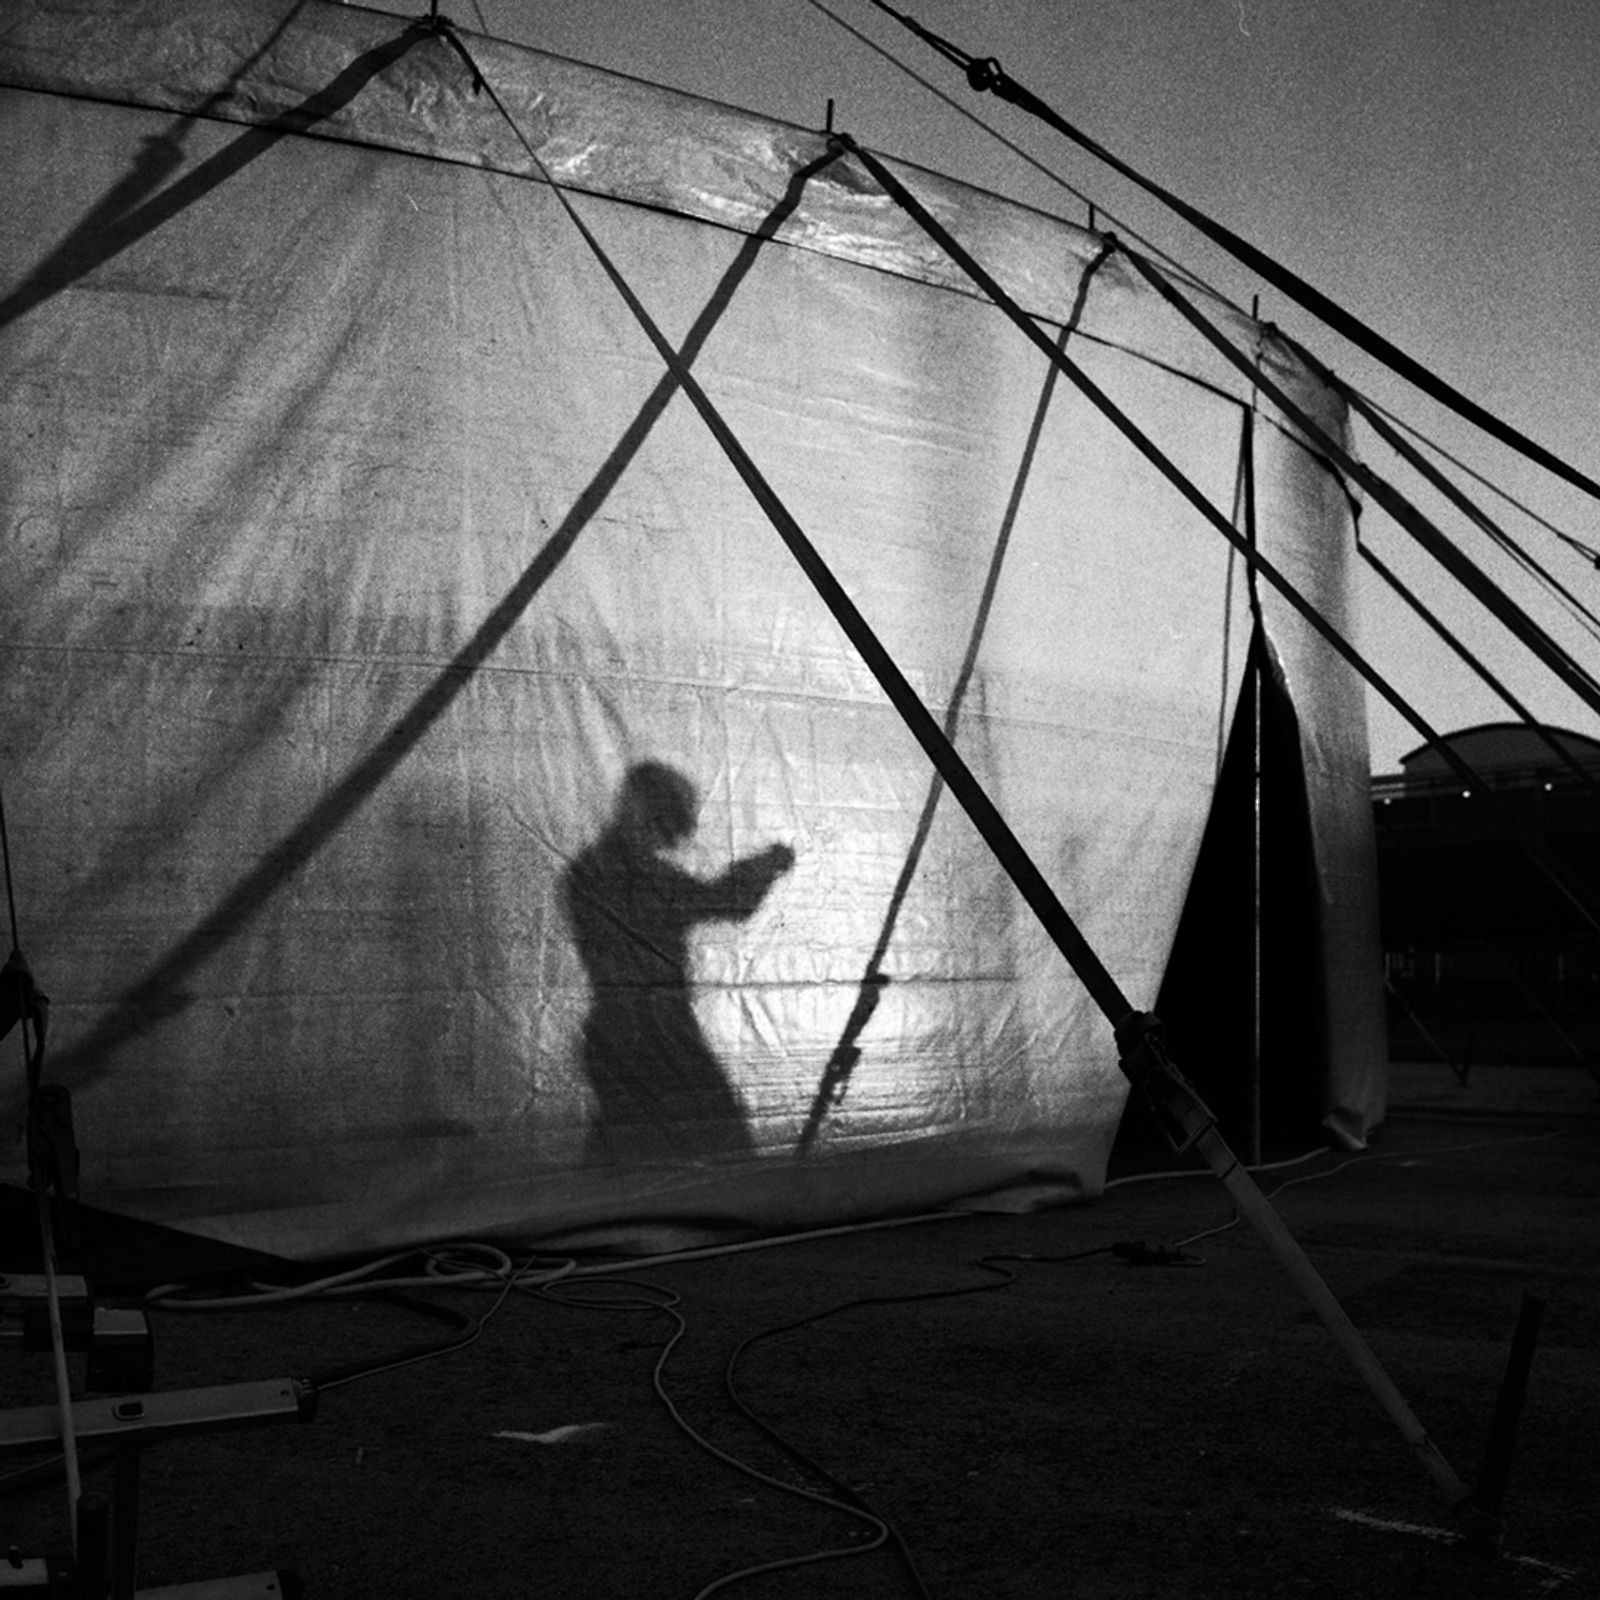 © Sabrina Caramanico - Image from the Circus photography project